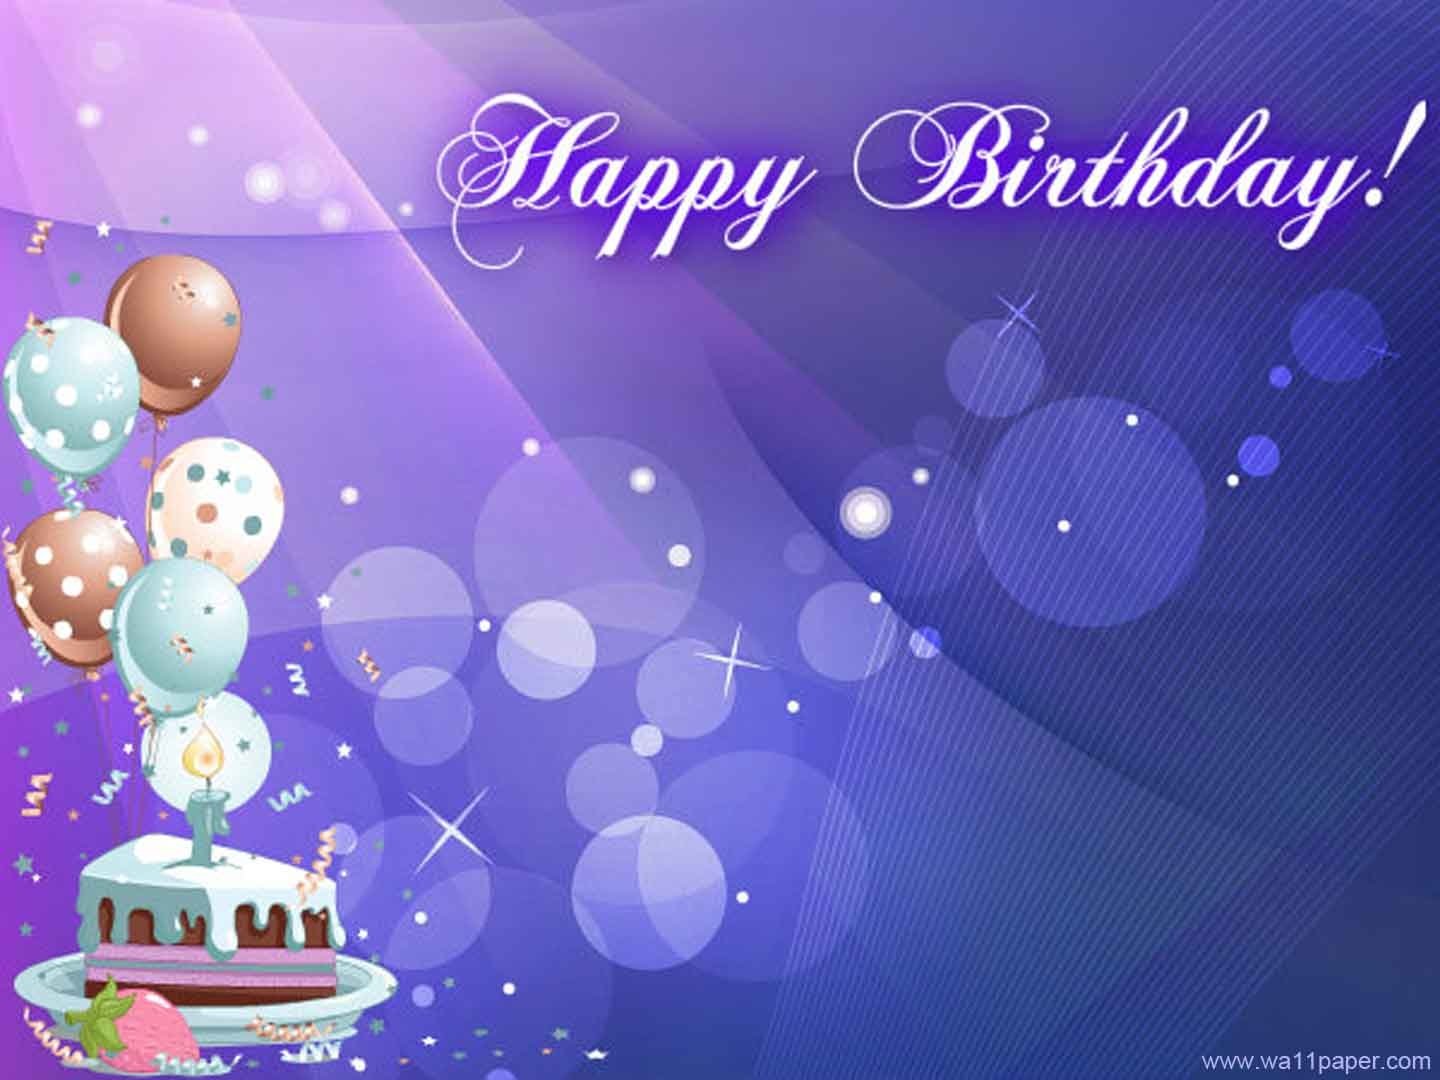 Wallpapers Id - - Happy Birthday Background Download , HD Wallpaper & Backgrounds